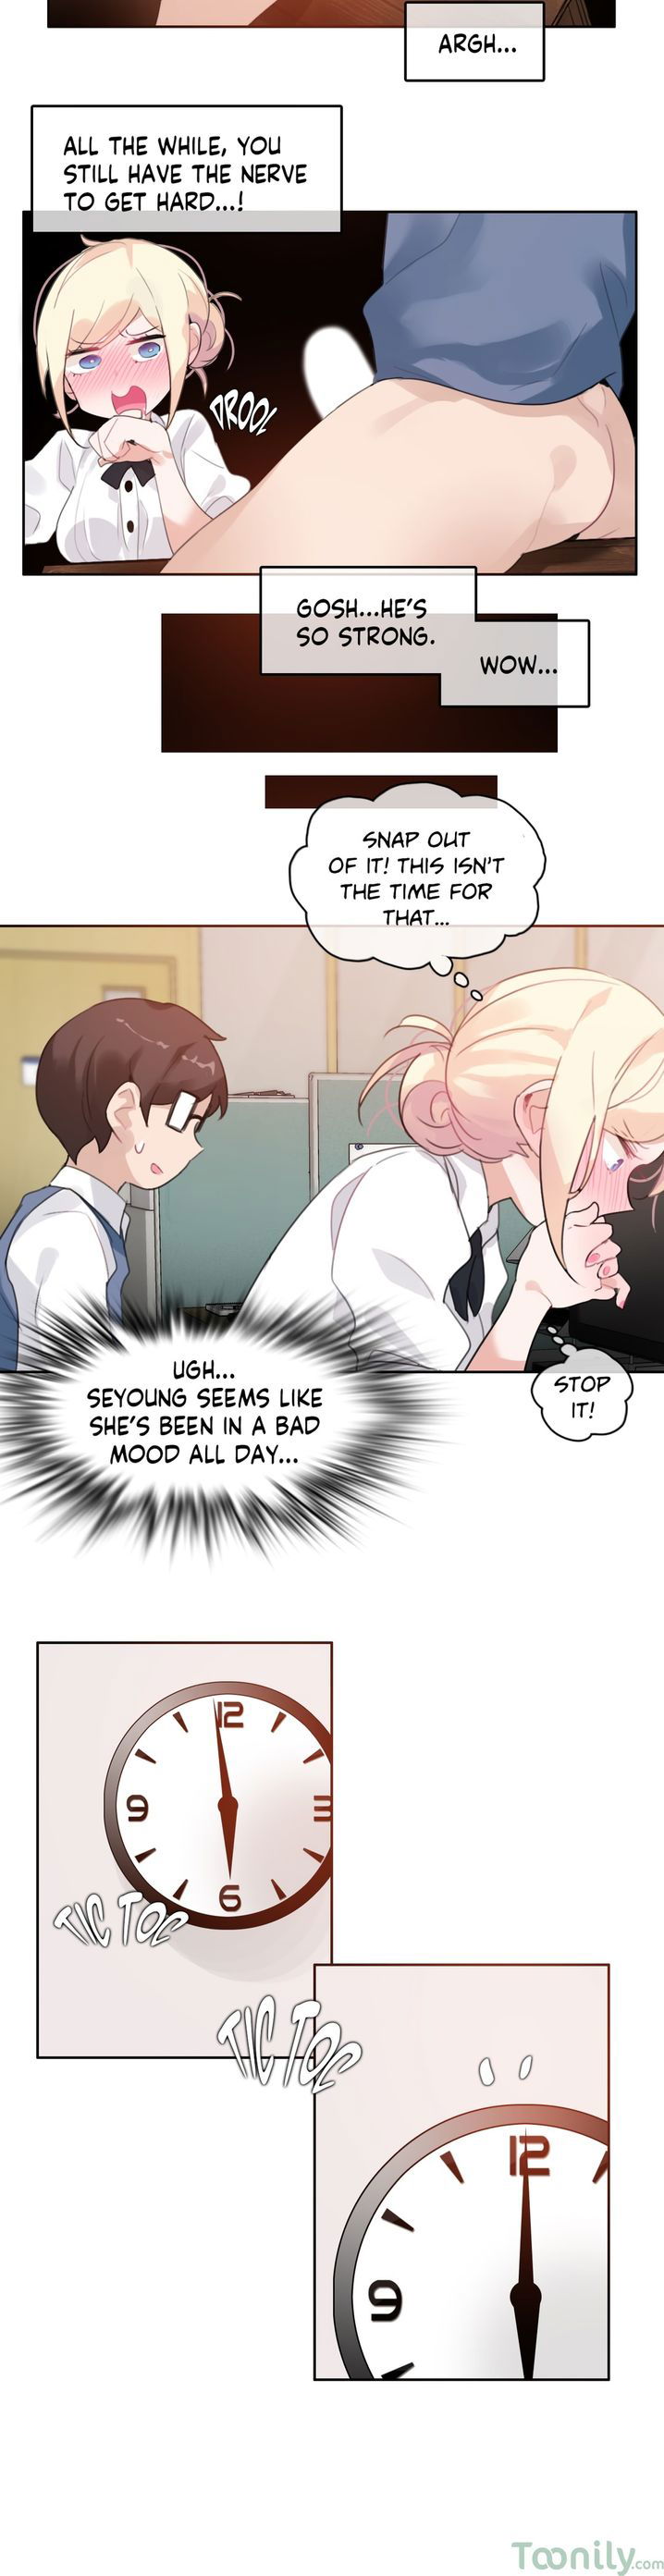 a-perverts-daily-life-chap-27-5